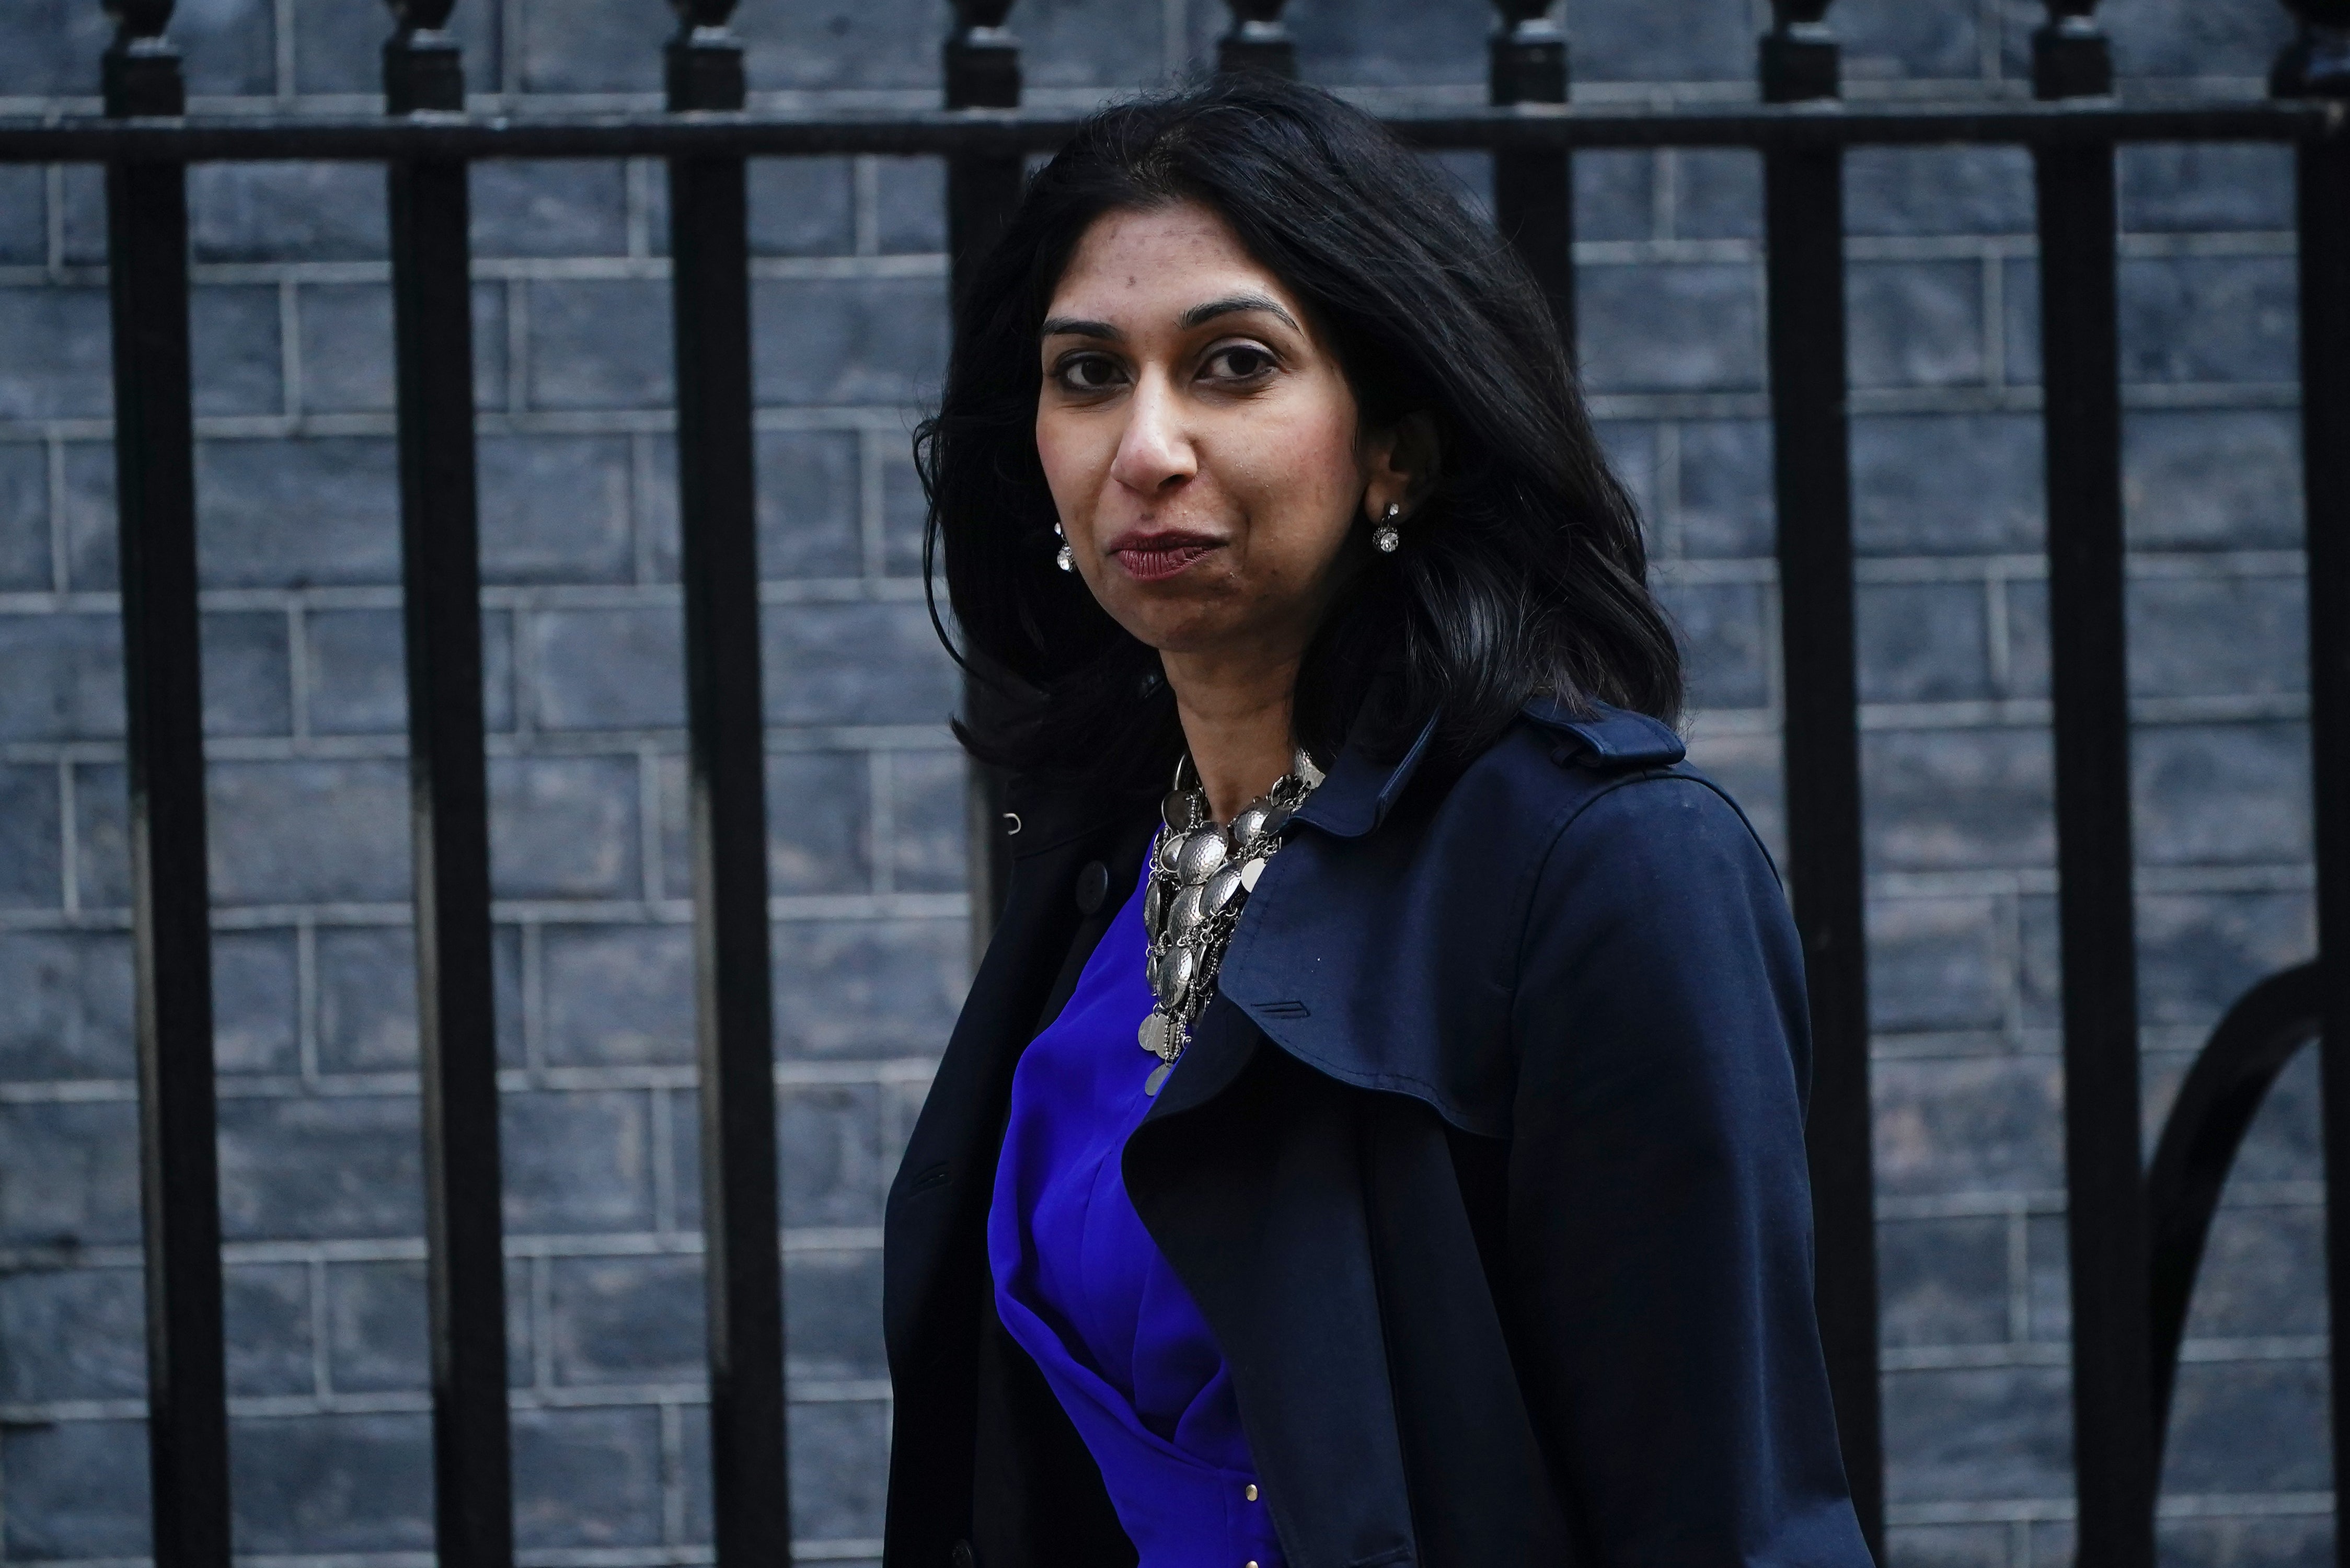 Suella Braverman said: “We’ve got is too many low skilled workers coming into this country” (Aaron Chown/PA)